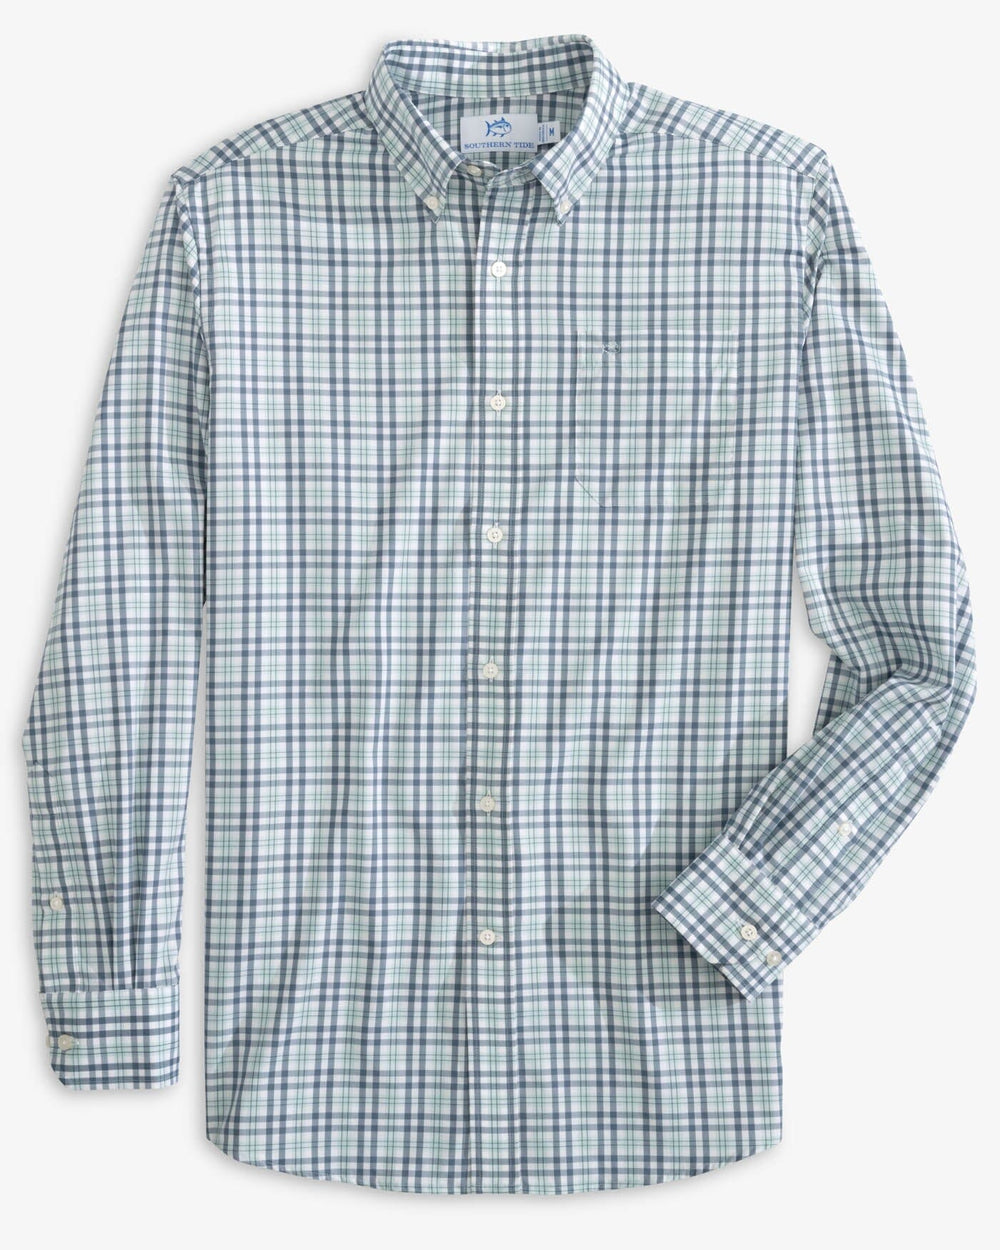 The front view of the Southern Tide Haywood brrr Plaid Intercoastal Sport Shirts by Southern Tide - Summer Aqua